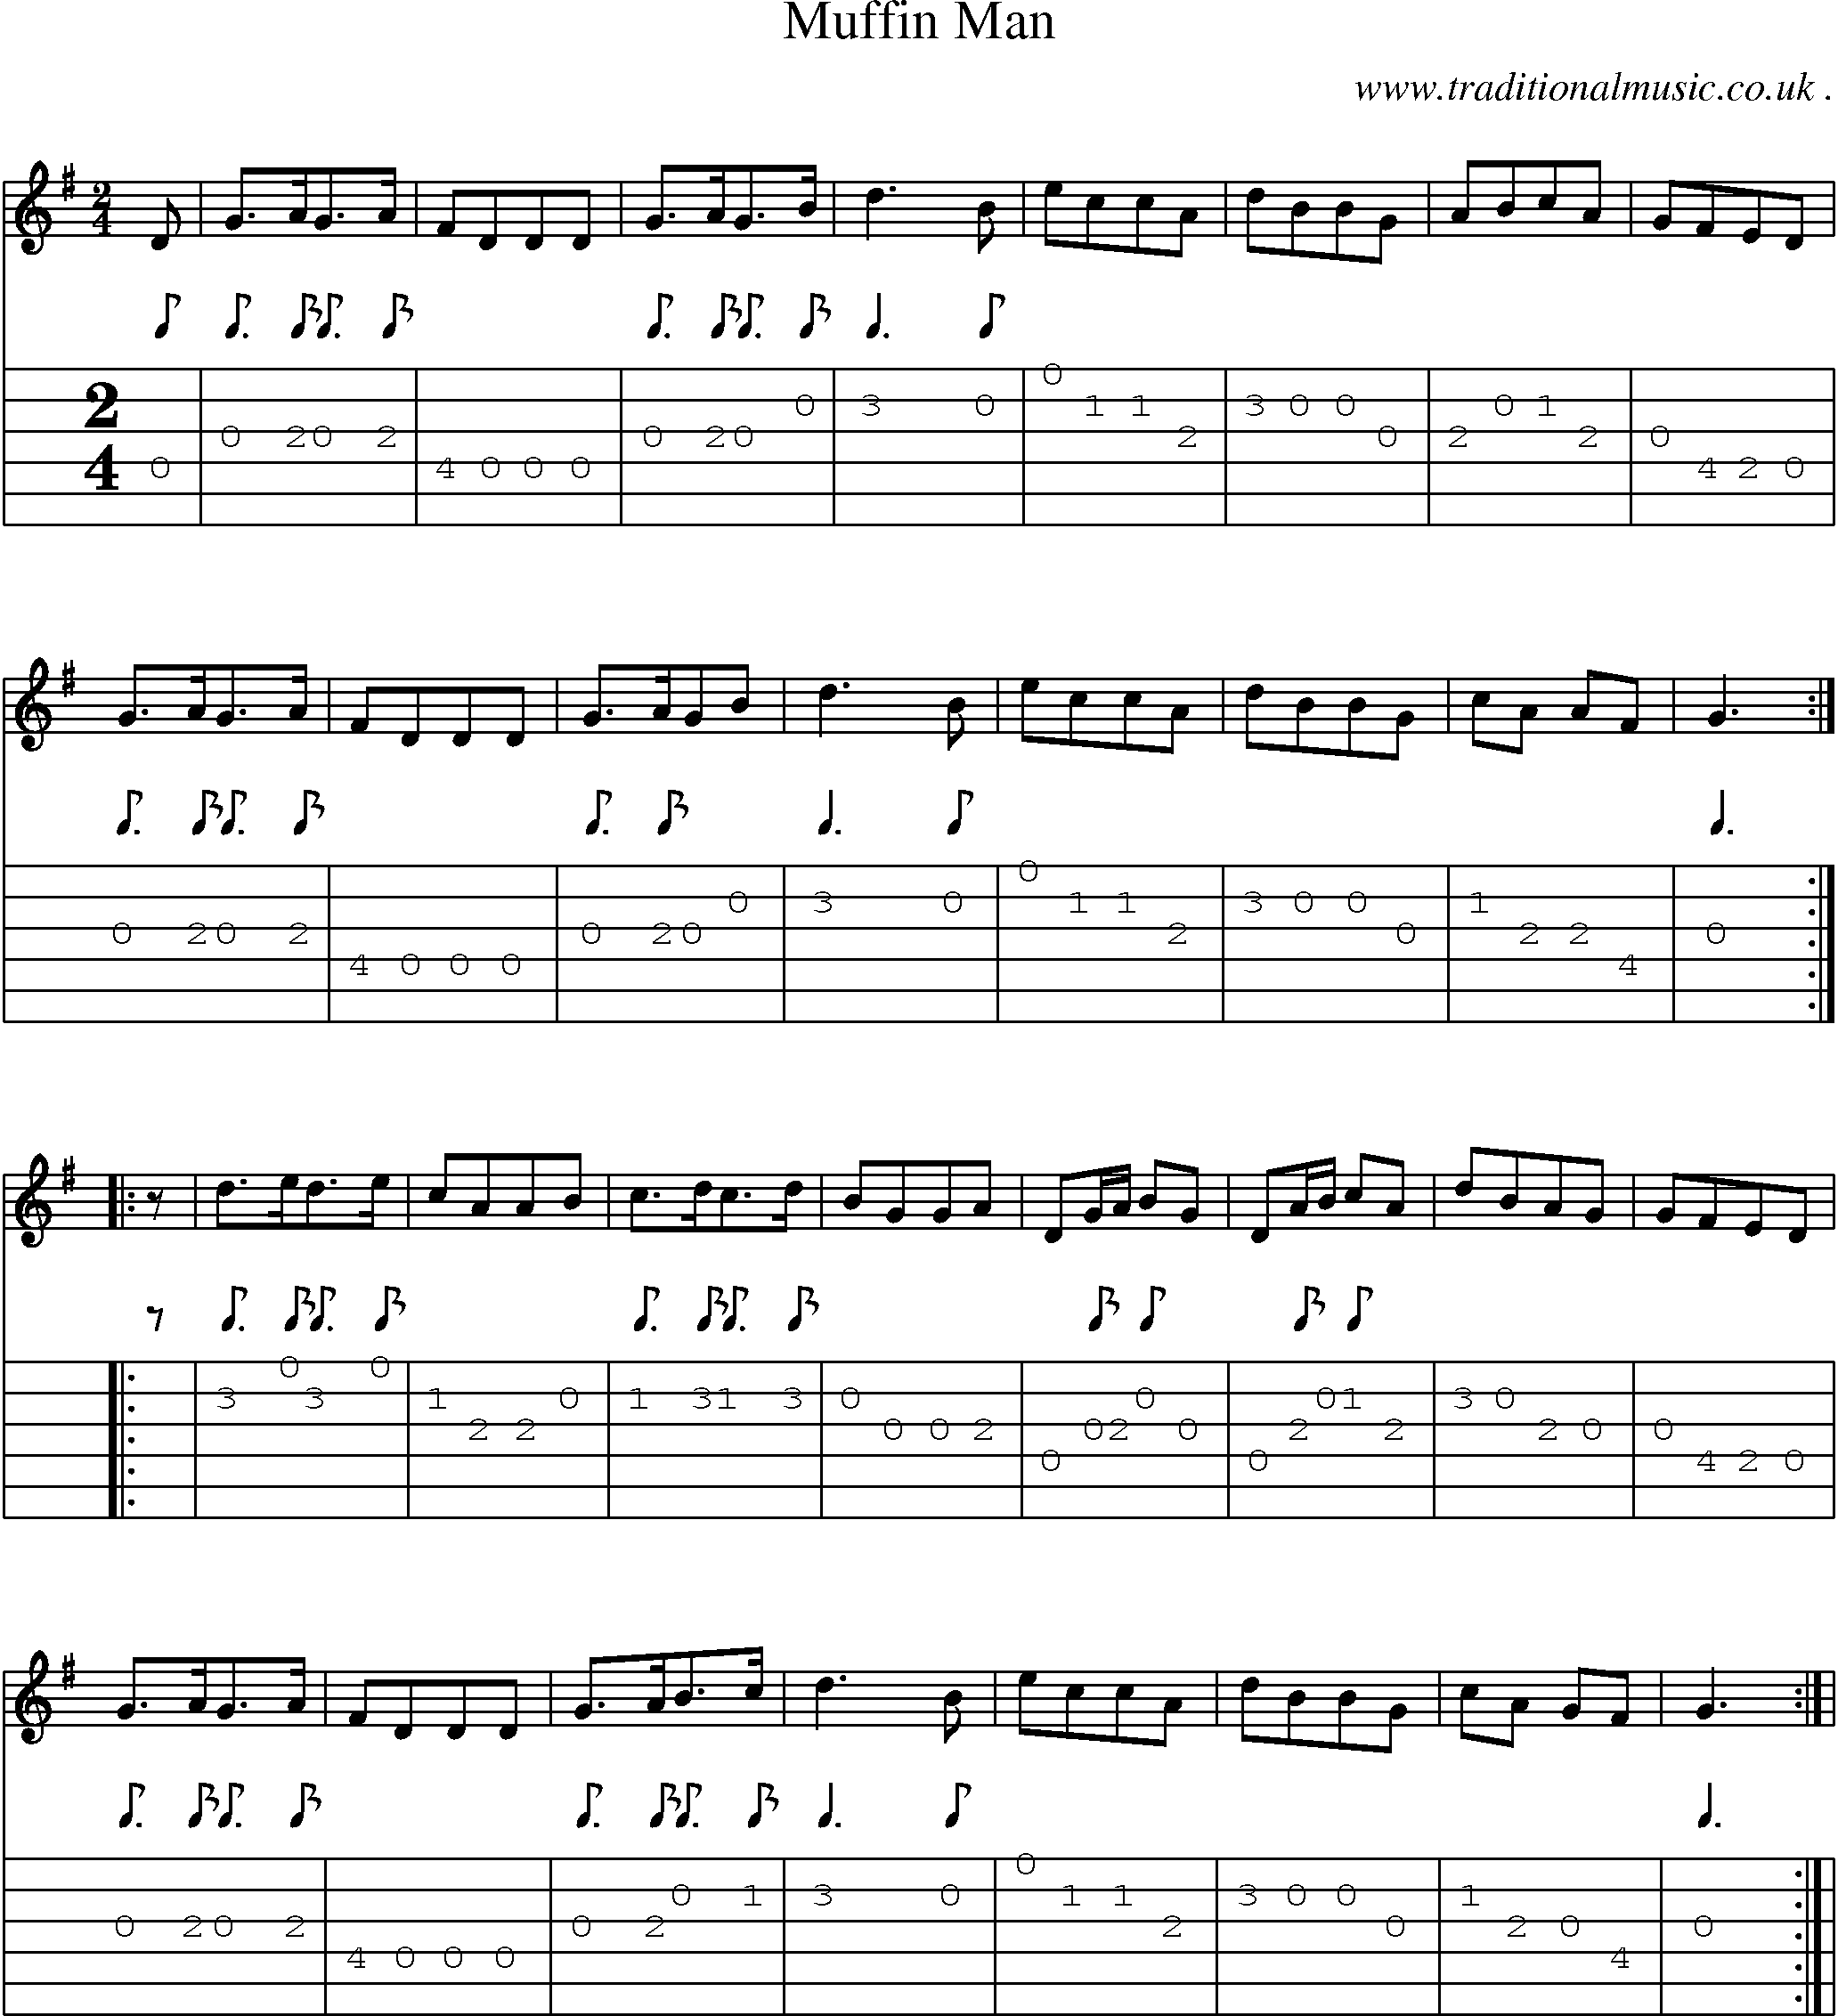 Sheet-Music and Guitar Tabs for Muffin Man